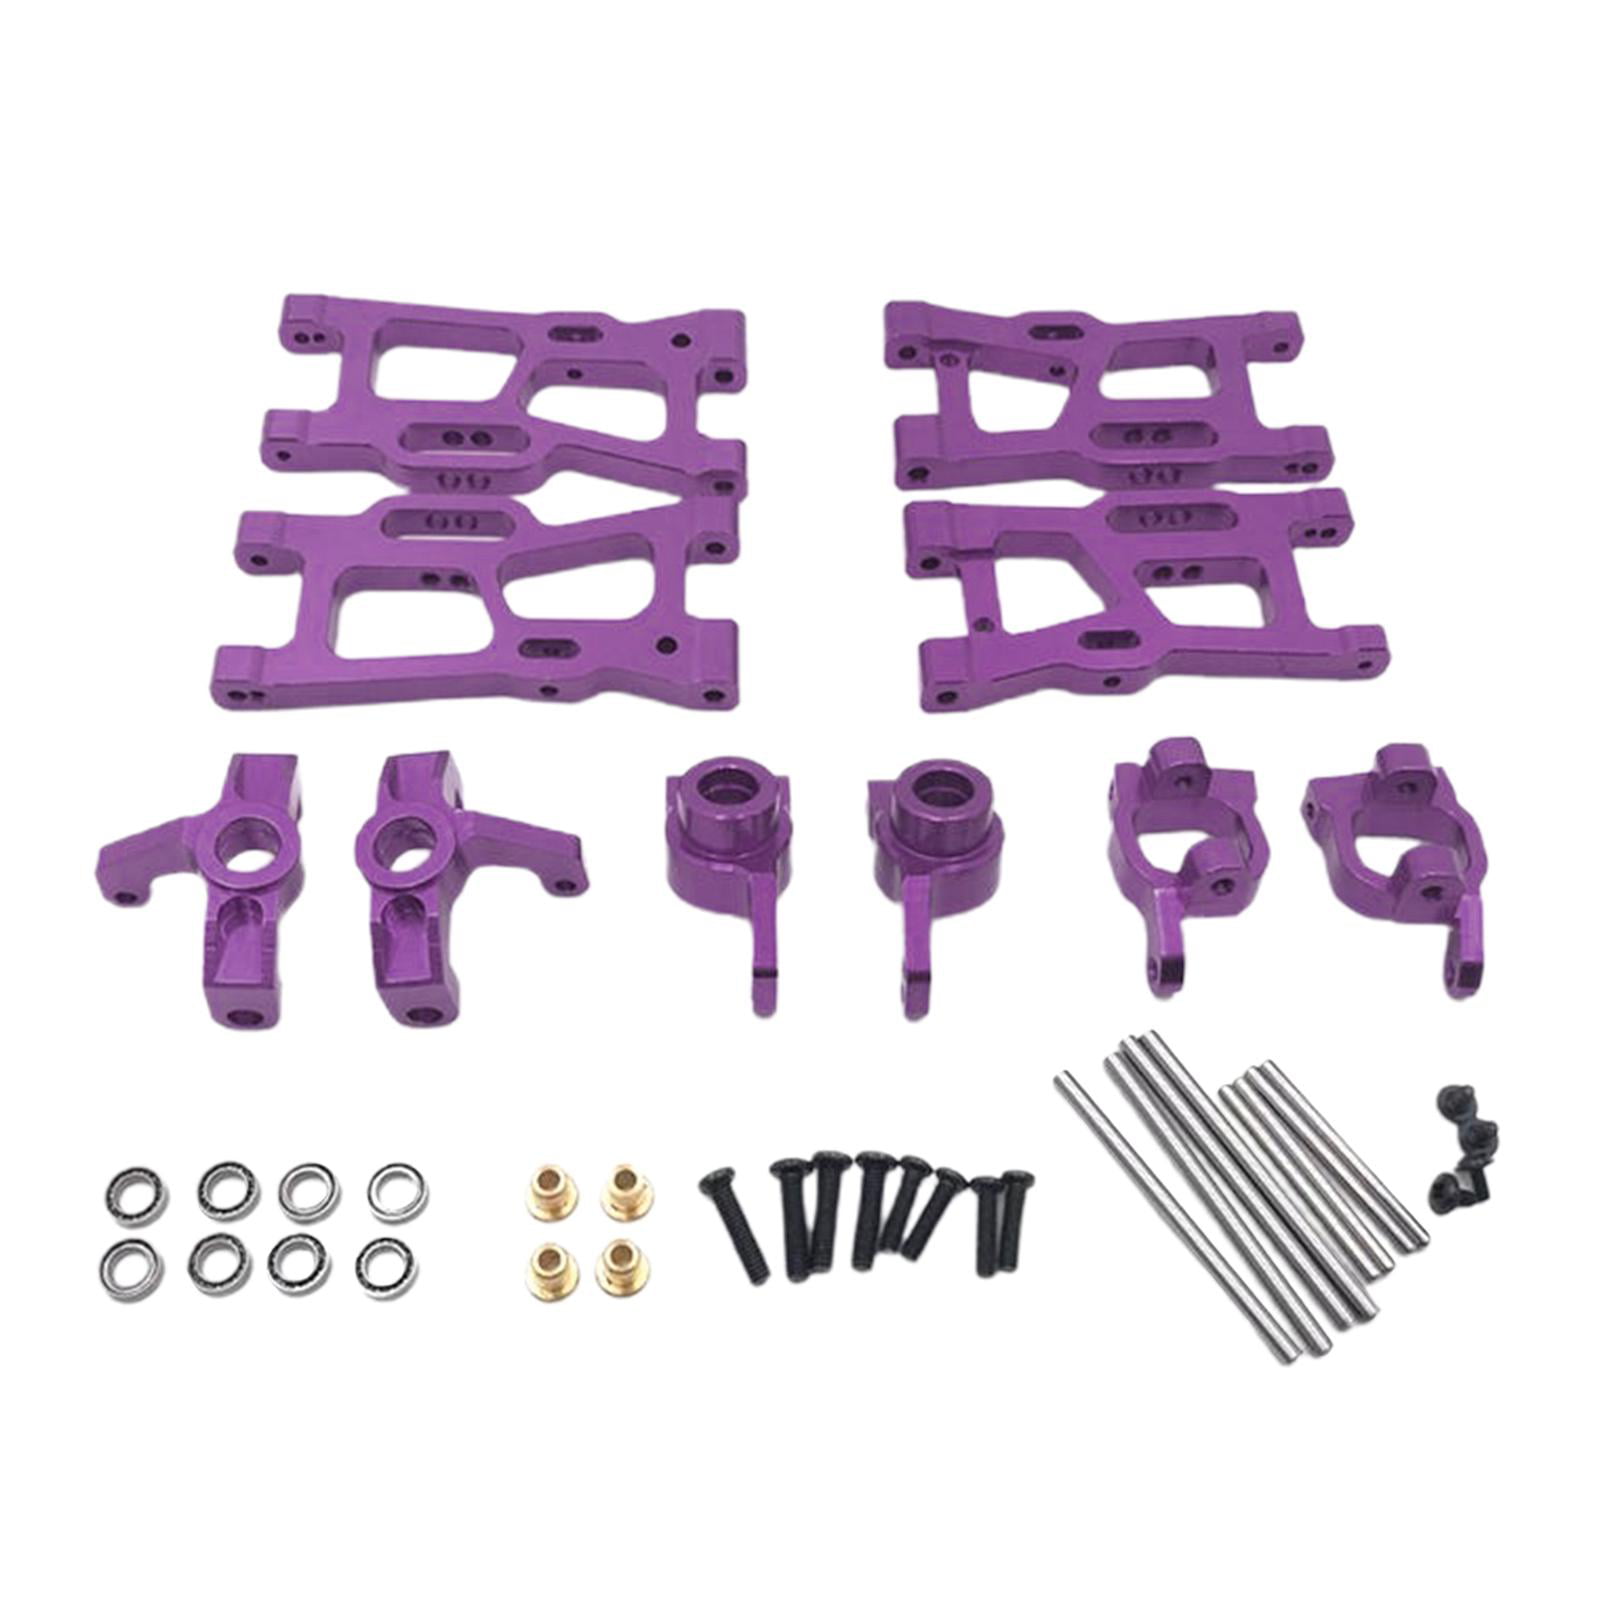 Metal Upgrades Parts Kit for WLtoys 144001 124018 124019 Toy Rc car Replacement 